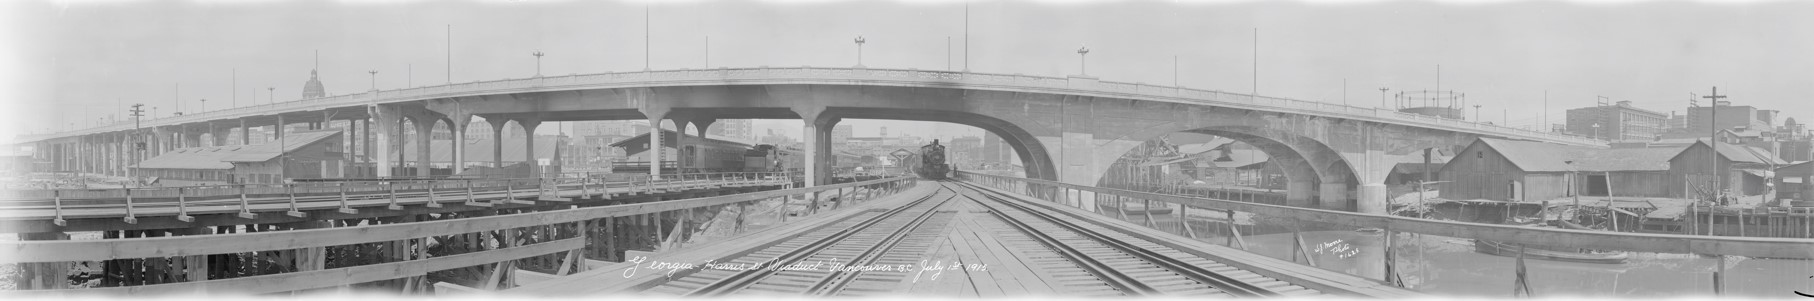 The VW&YR depot on Dupont street in 1915